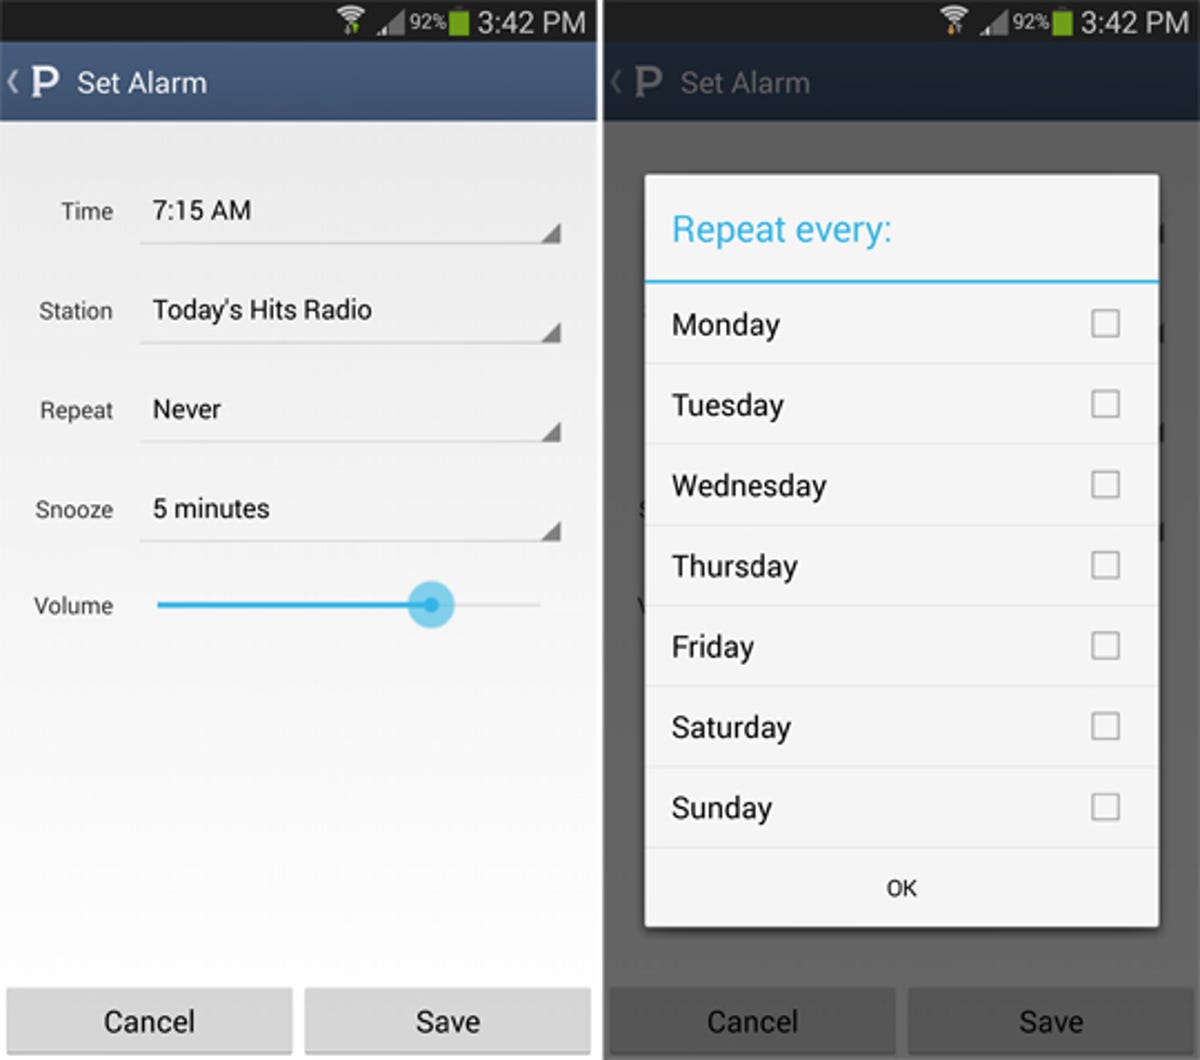 Pandora for Android alarm settings